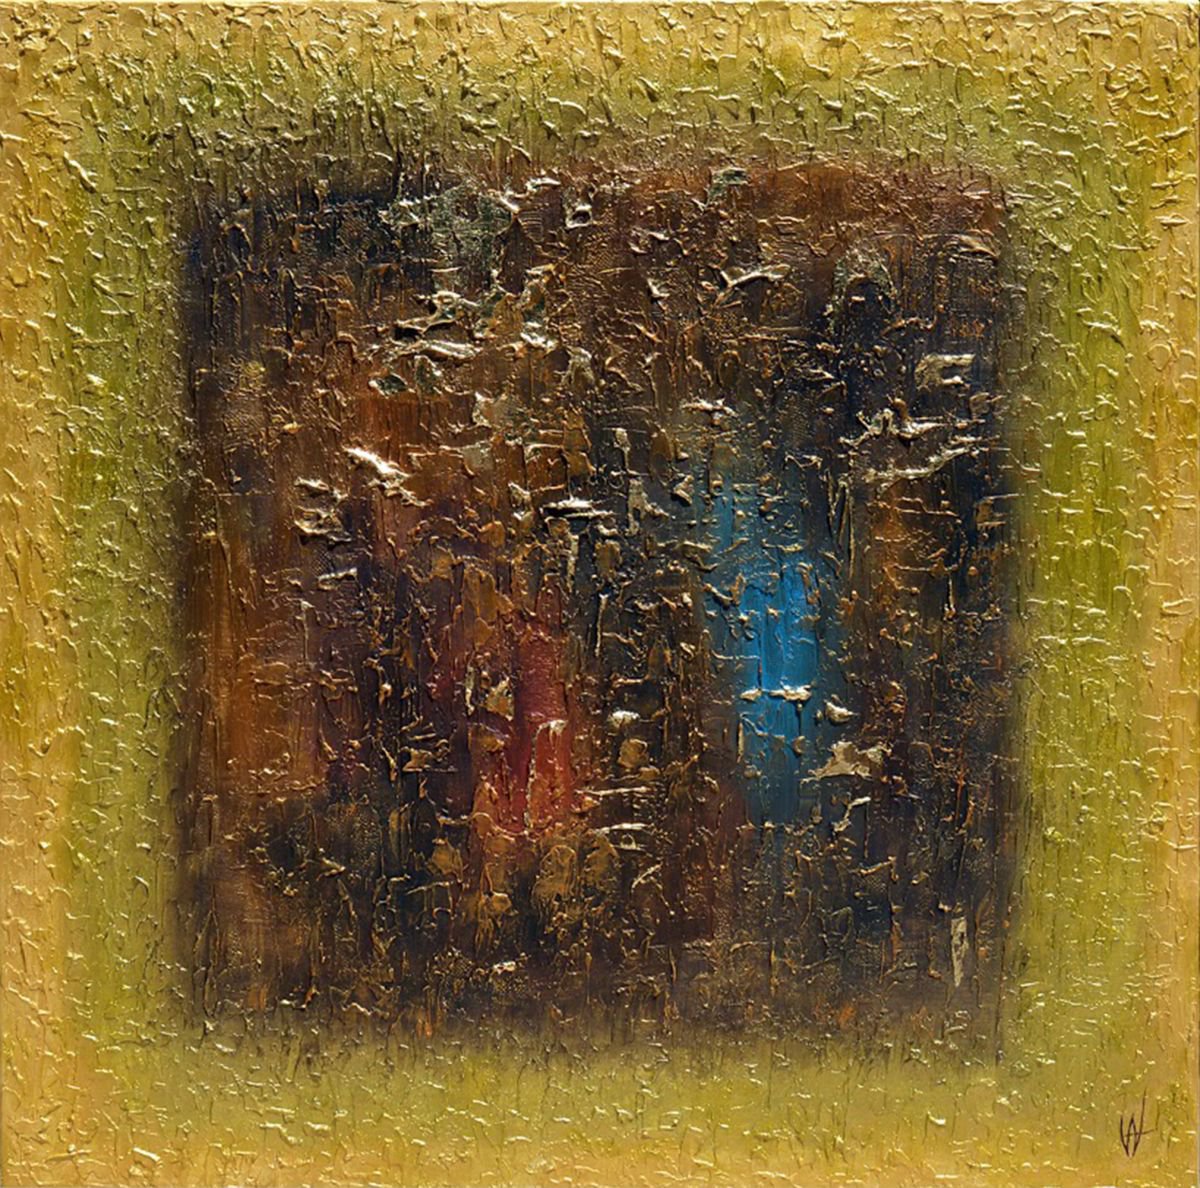 Abstract art - ABSTRACT FEELINGS - LARGE SQUARED TEXTURED PAINTING by VANADA ABSTRACT ART